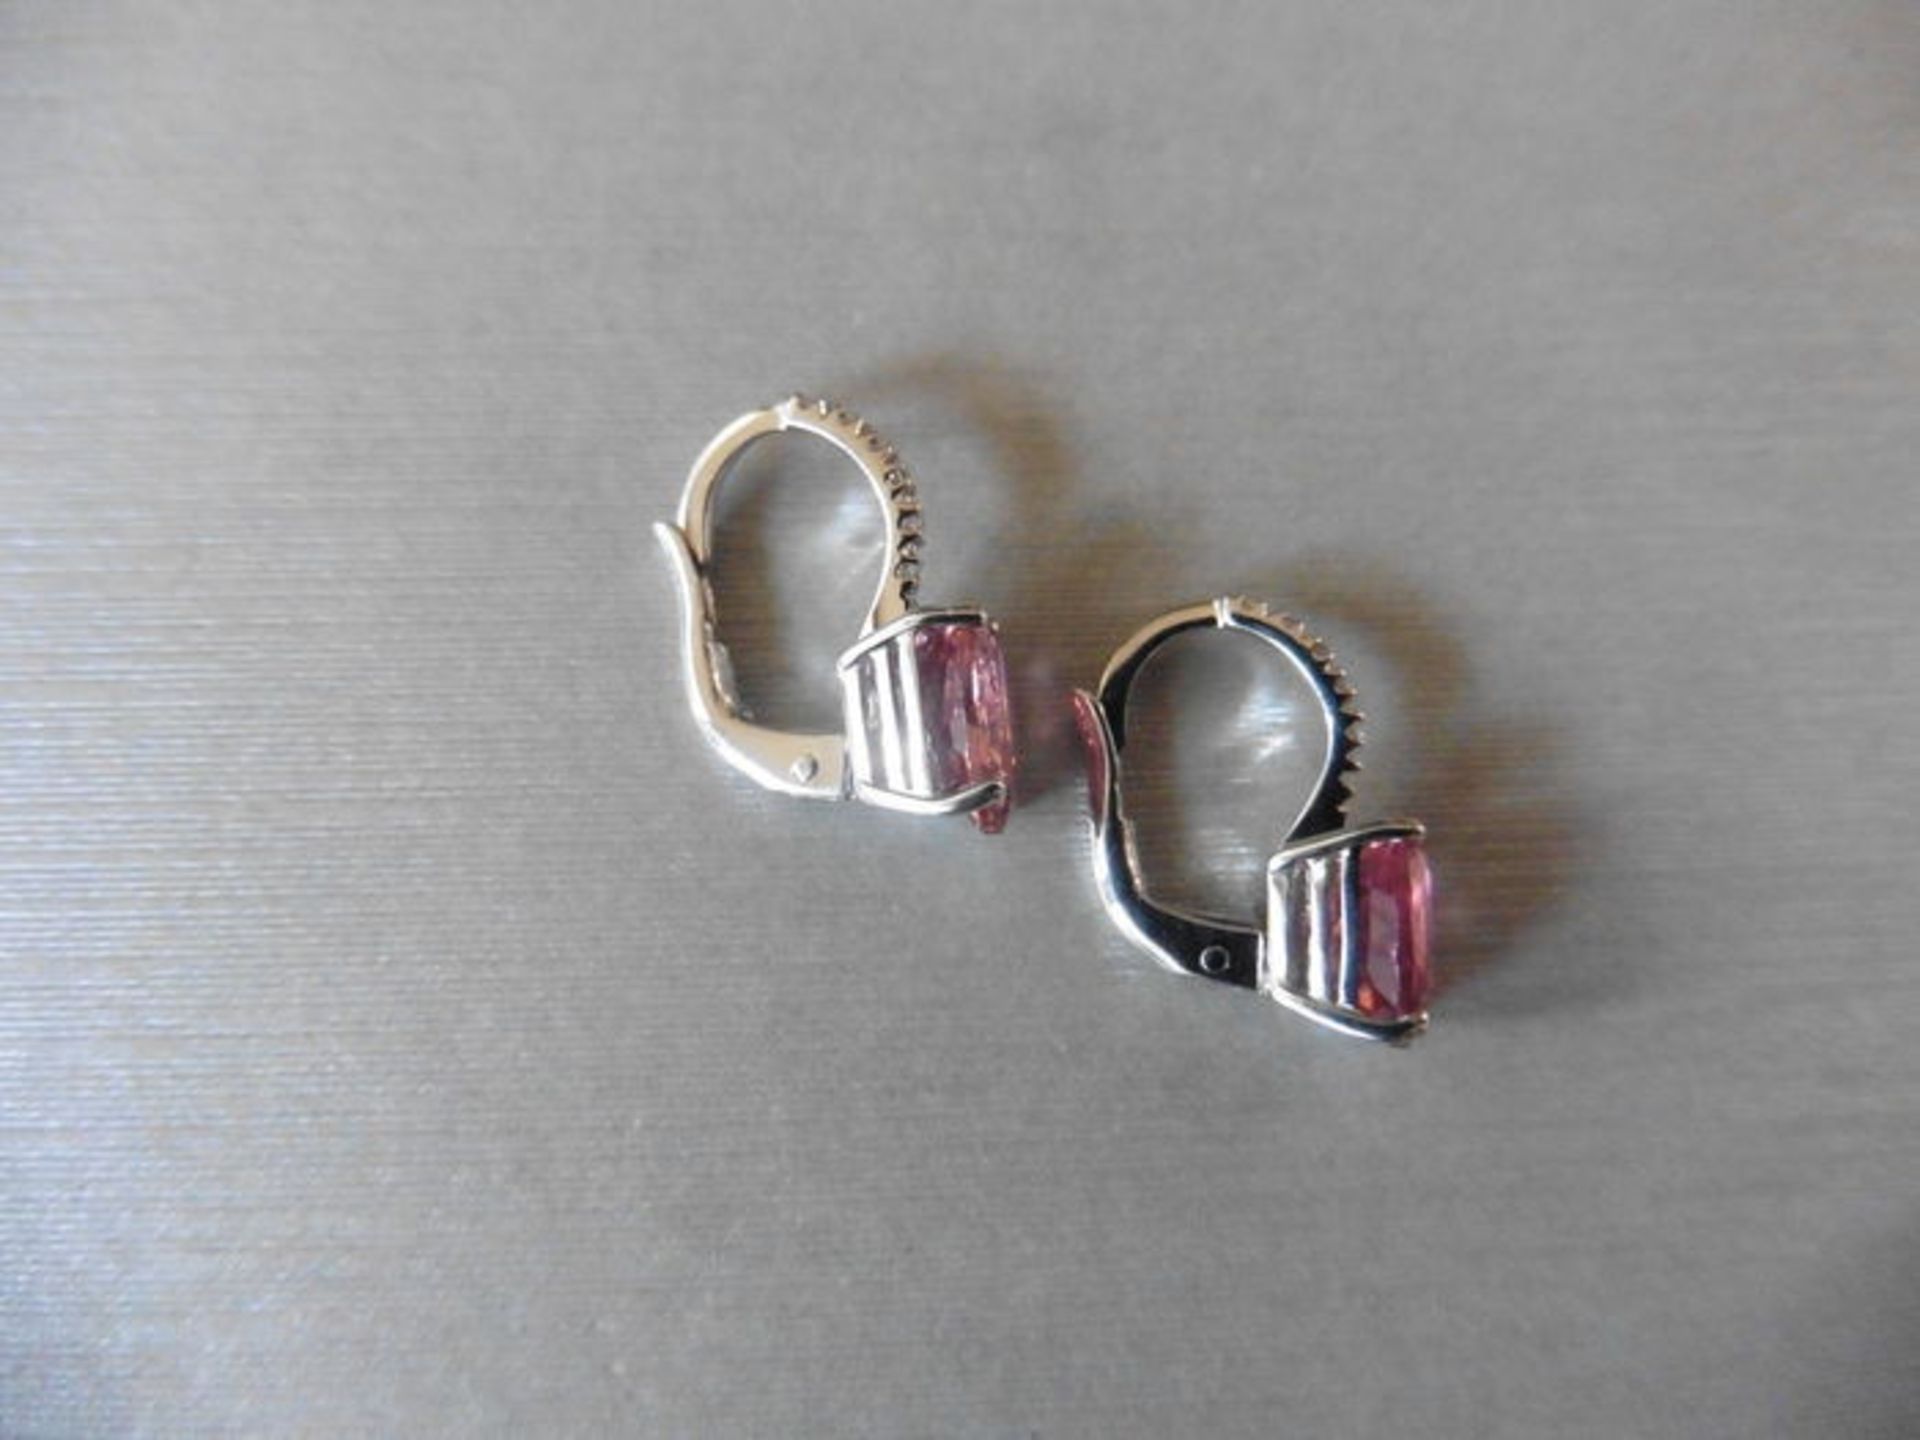 9ctct white gold tourmaline and diamond hoop style earrings. 2 oval cut tourmalines, 1.60ct total - Image 2 of 3